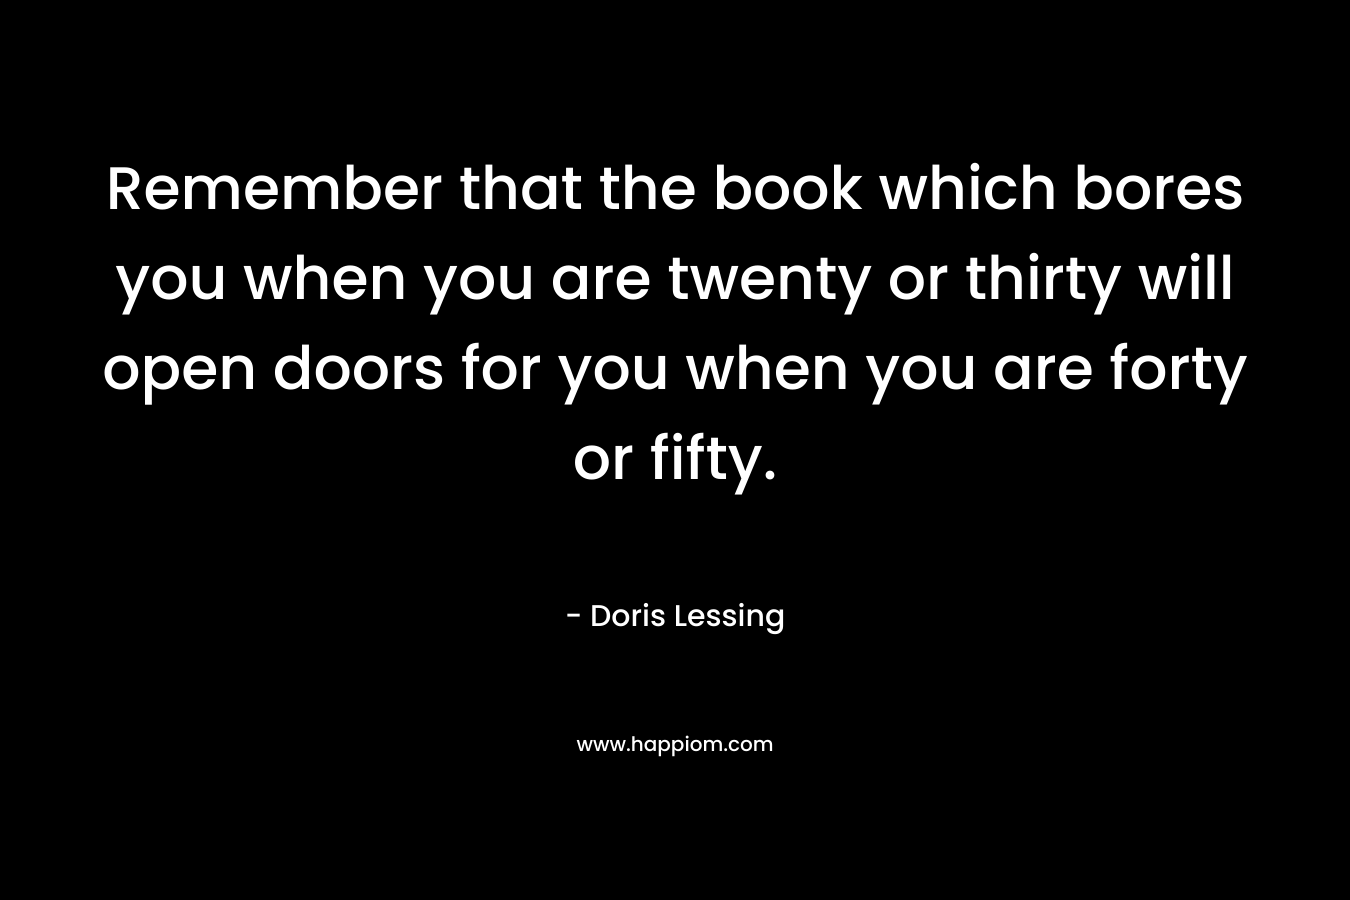 Remember that the book which bores you when you are twenty or thirty will open doors for you when you are forty or fifty.